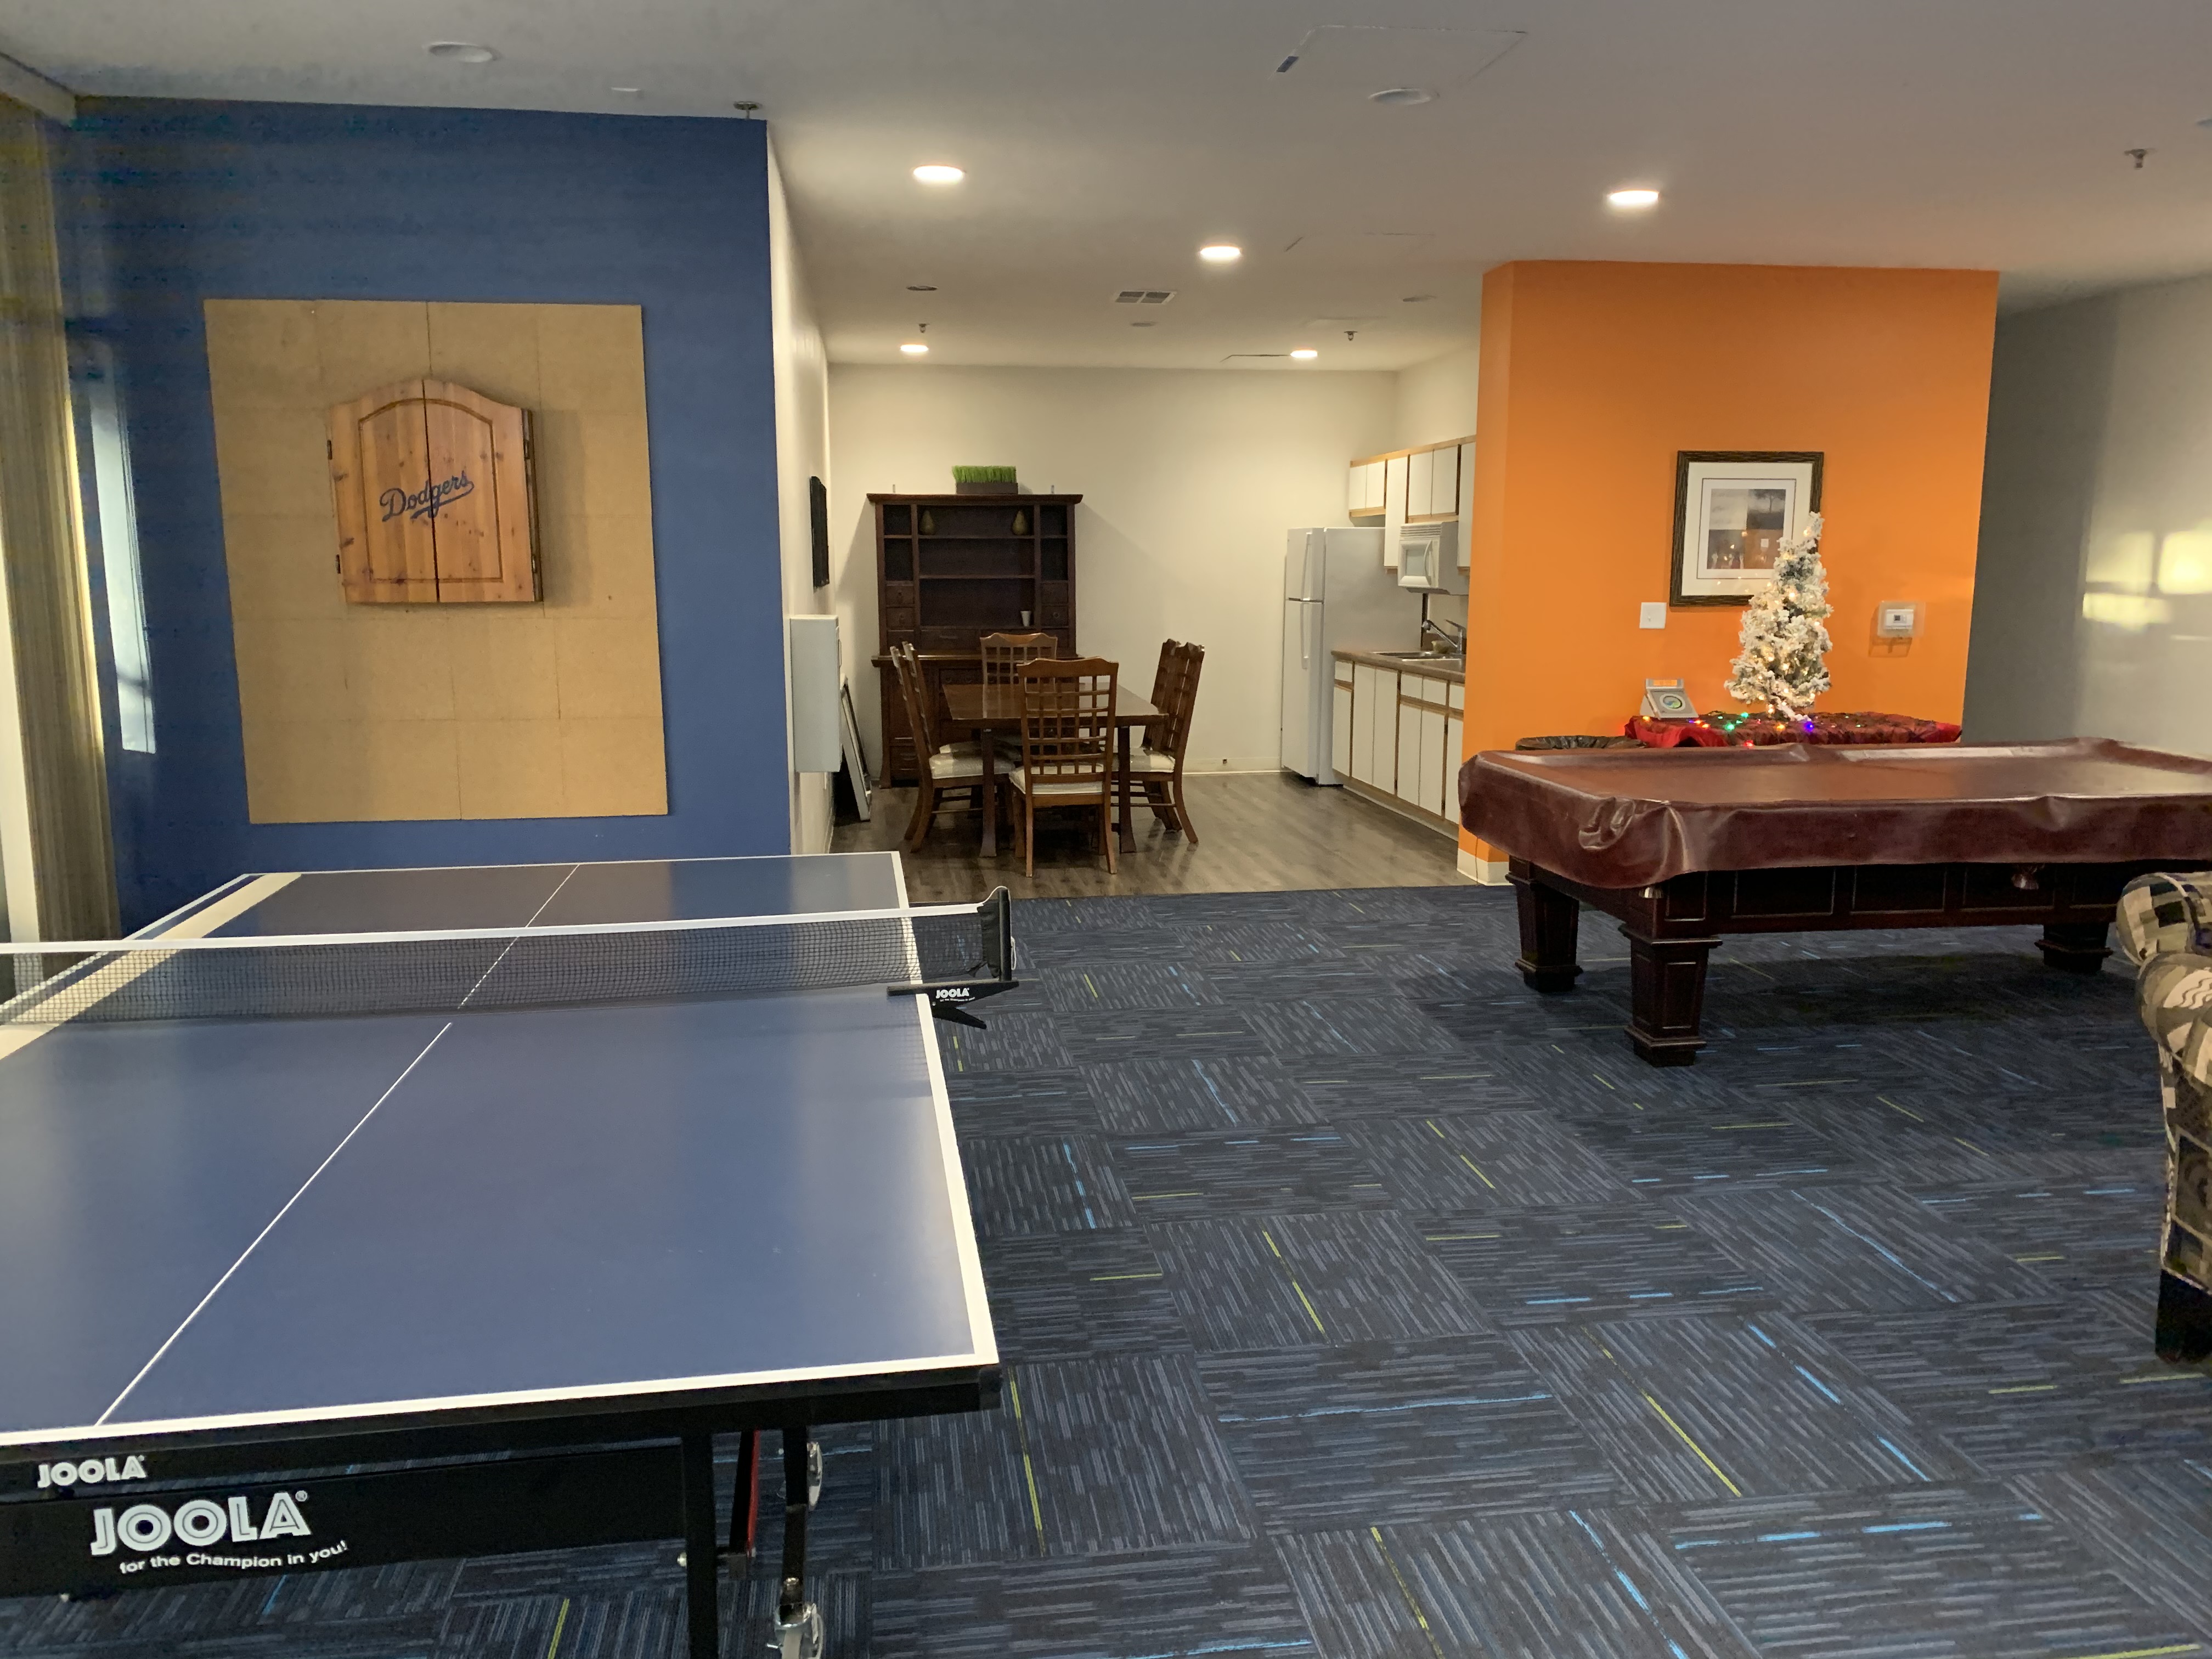 Different angle of the community room, From this view, there is a ping pong table, a dart board, a pool table and a kicthen area with a dining set table.